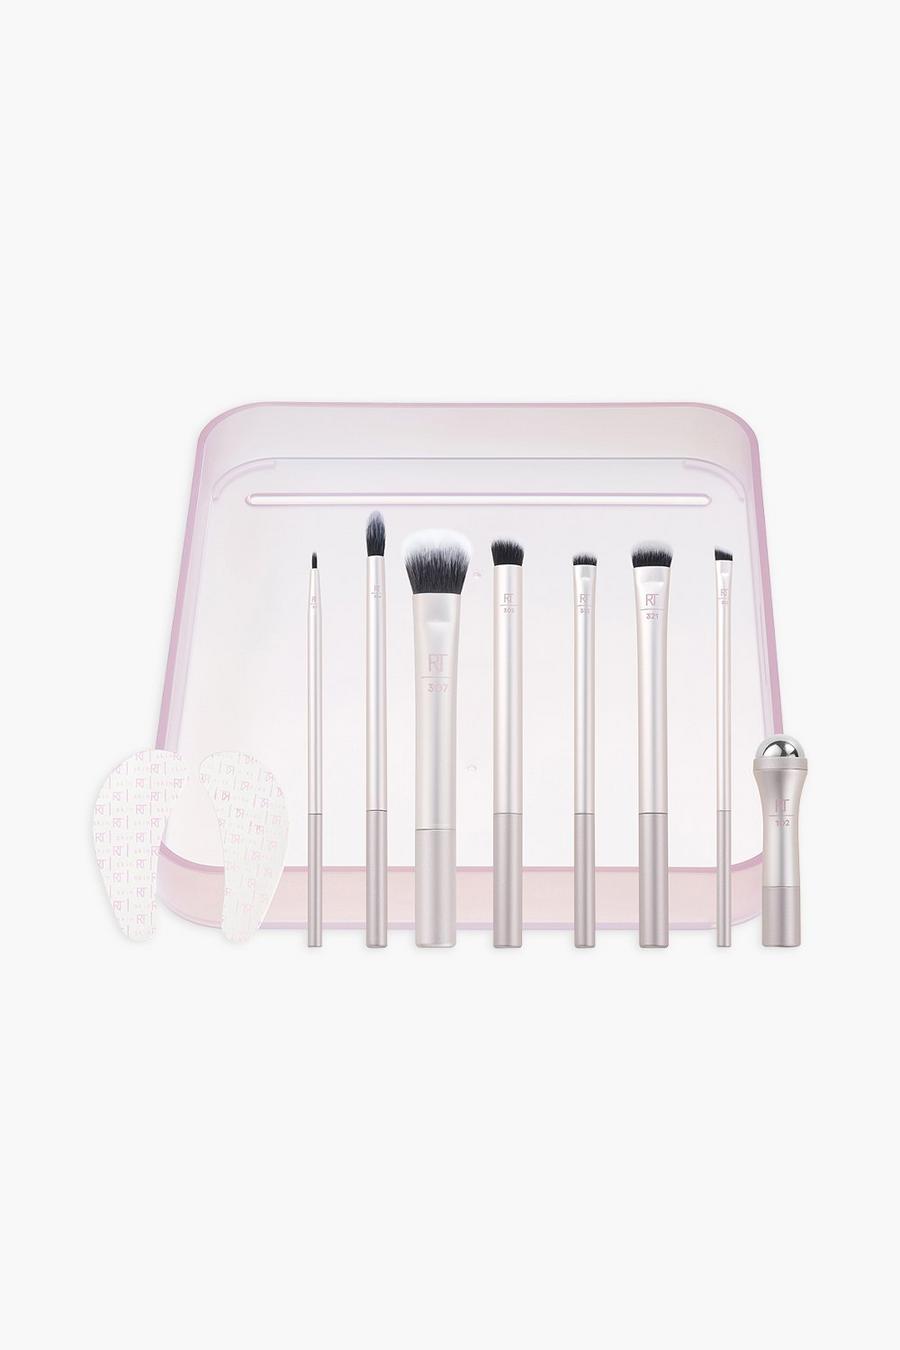 Pink rose Real Techniques Bright Eyes Makeup Brush Kit 